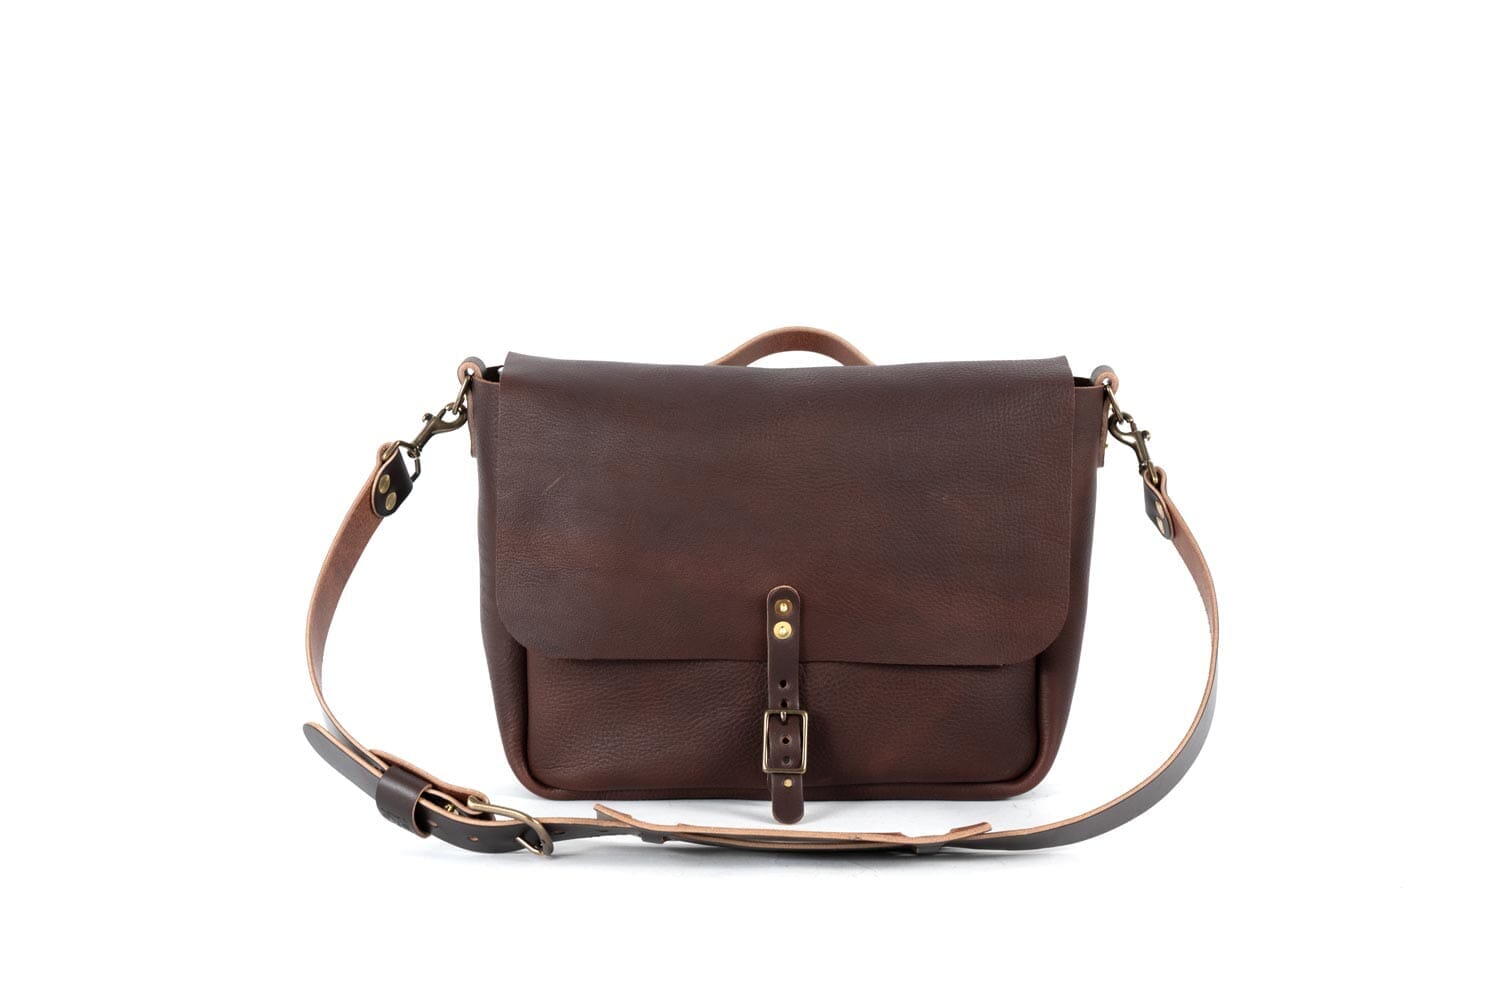 STEPHEN LEATHER MESSENGER BAG - SMALL - CHERRY BISON